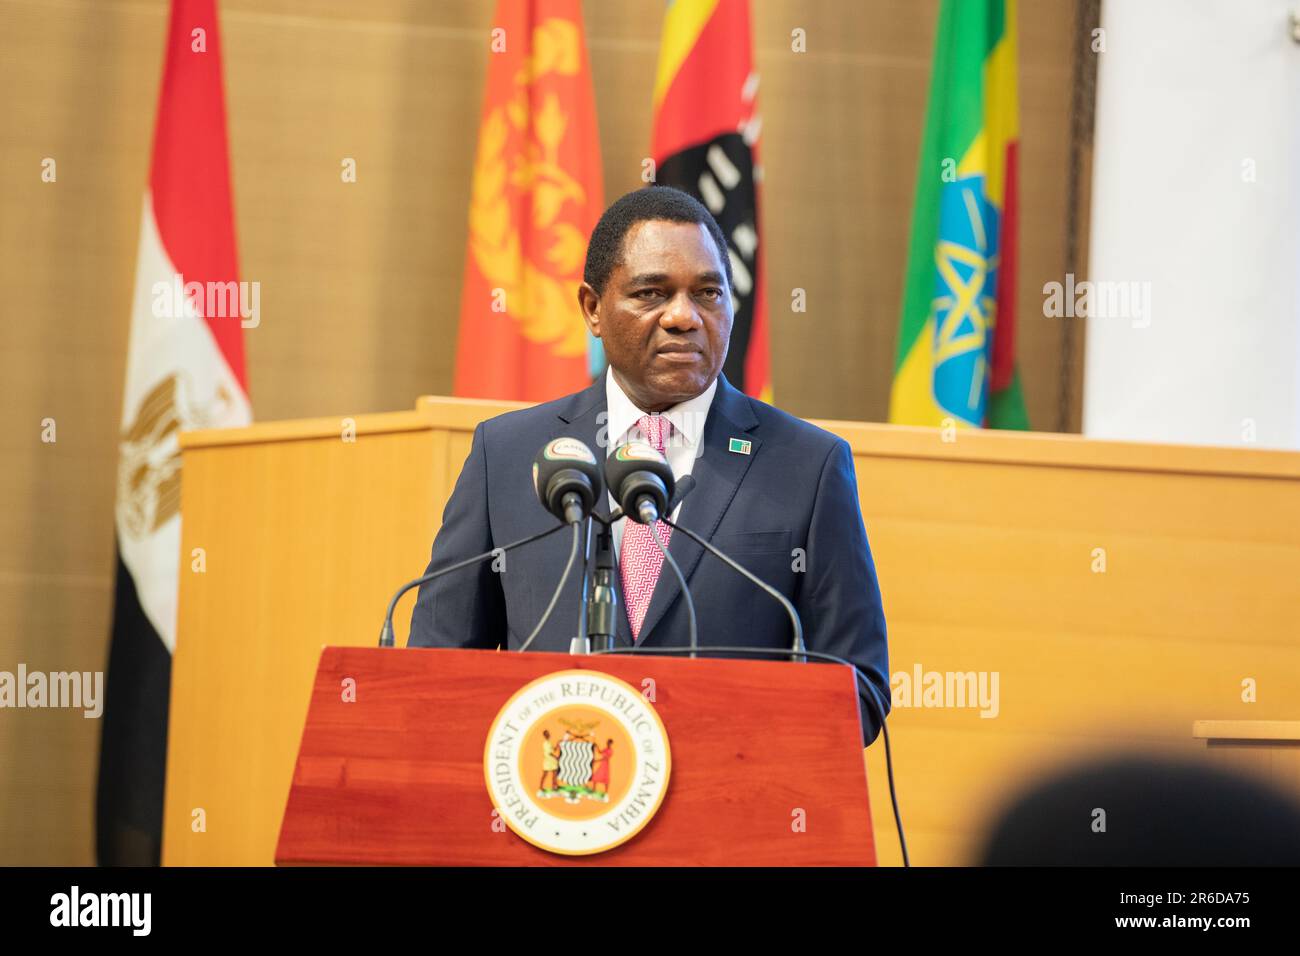 Lusaka, Zambia. 8th June, 2023. Zambian President Hakainde Hichilema speaks during the 22nd Common Market for Eastern and Southern Africa (COMESA) Heads of State and Government Summit in Lusaka, Zambia, June 8, 2023. The 22nd Common Market for Eastern and Southern Africa (COMESA) Heads of State and Government Summit opened here Thursday, with leaders calling for accelerated efforts to achieve economic integration. Credit: Peng Lijun/Xinhua/Alamy Live News Stock Photo